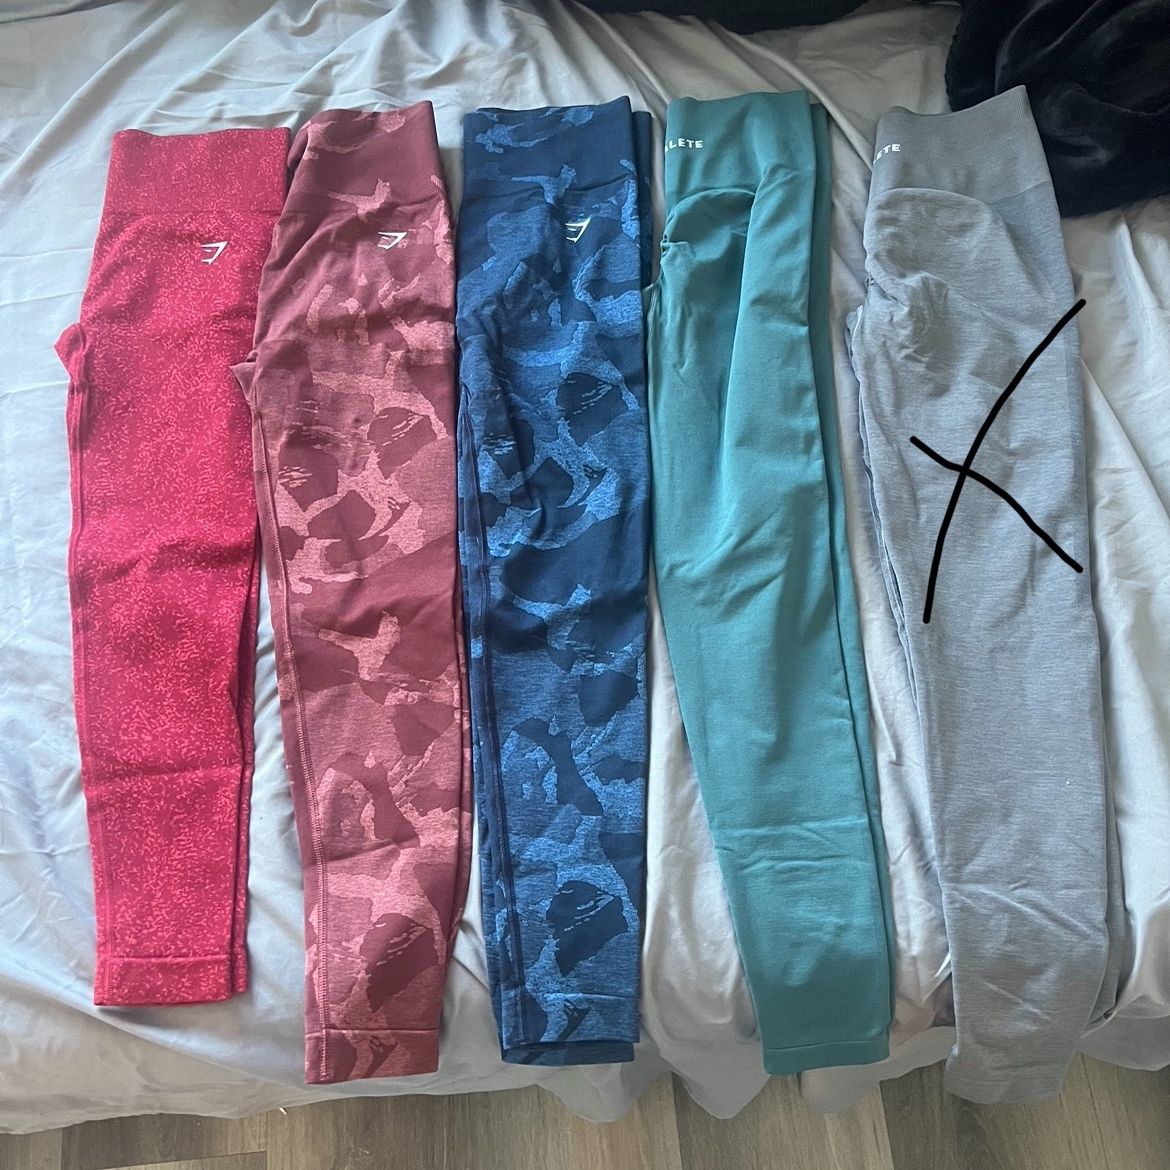 Alphalete Leggings Size Small for Sale in Los Angeles, CA - OfferUp